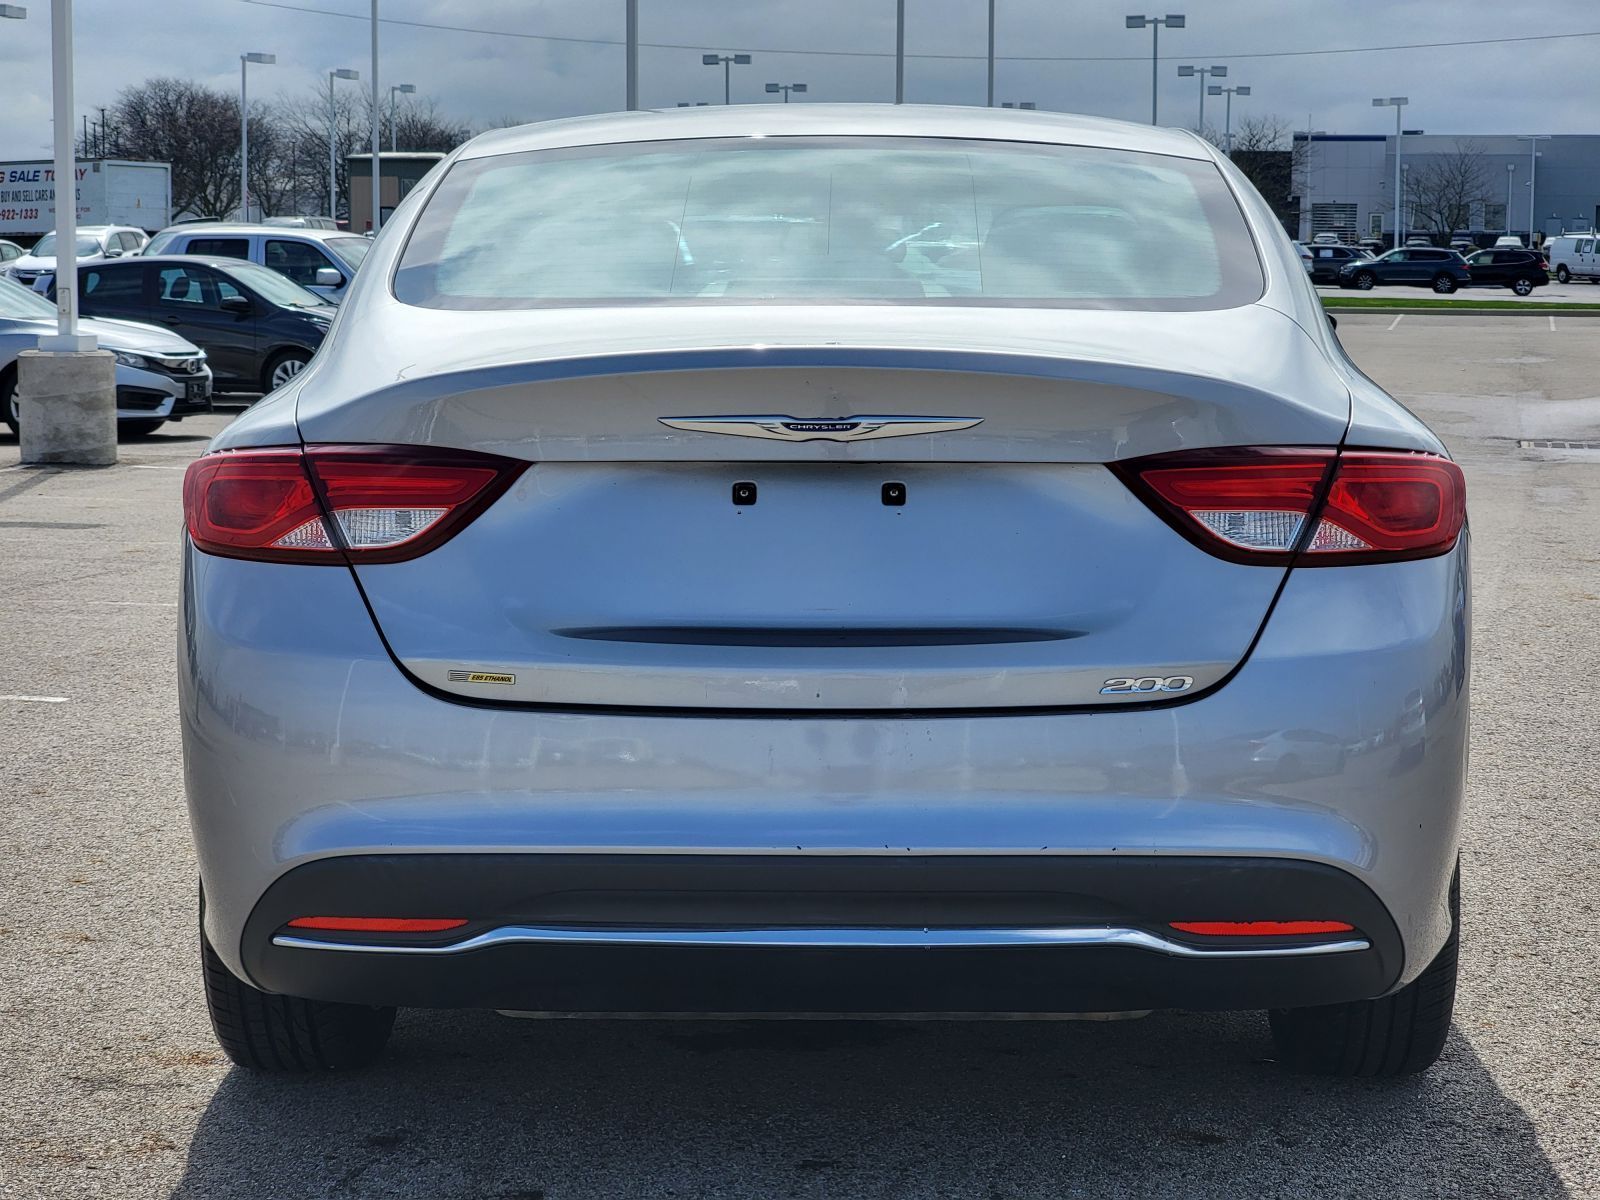 Used, 2015 Chrysler 200 Limited, Silver, P0499-10